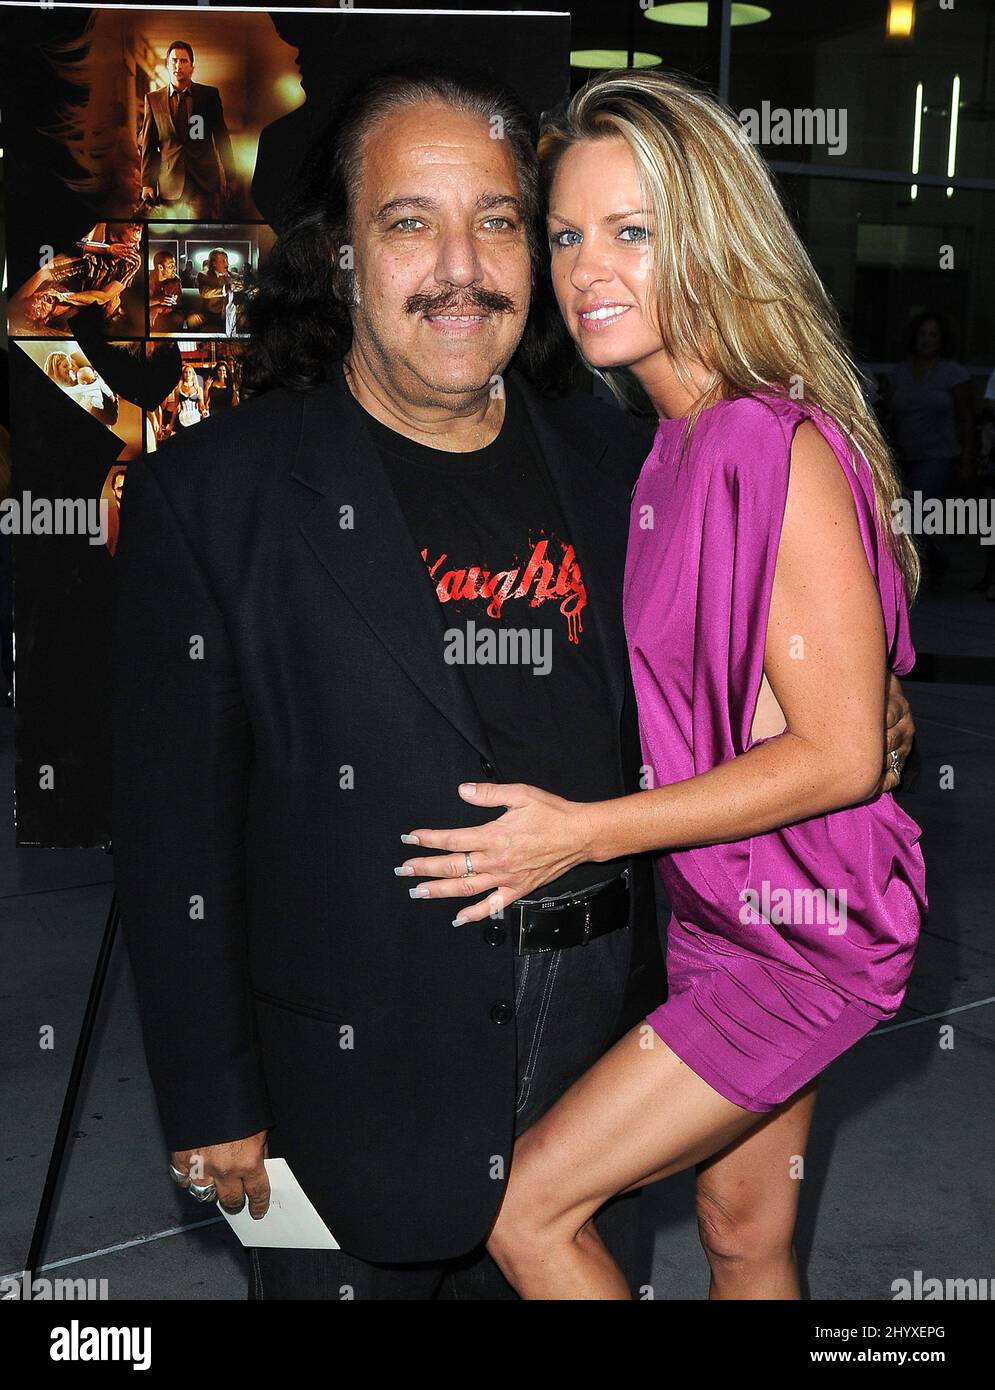 Ron jeremy hi-res stock photography and images pic image